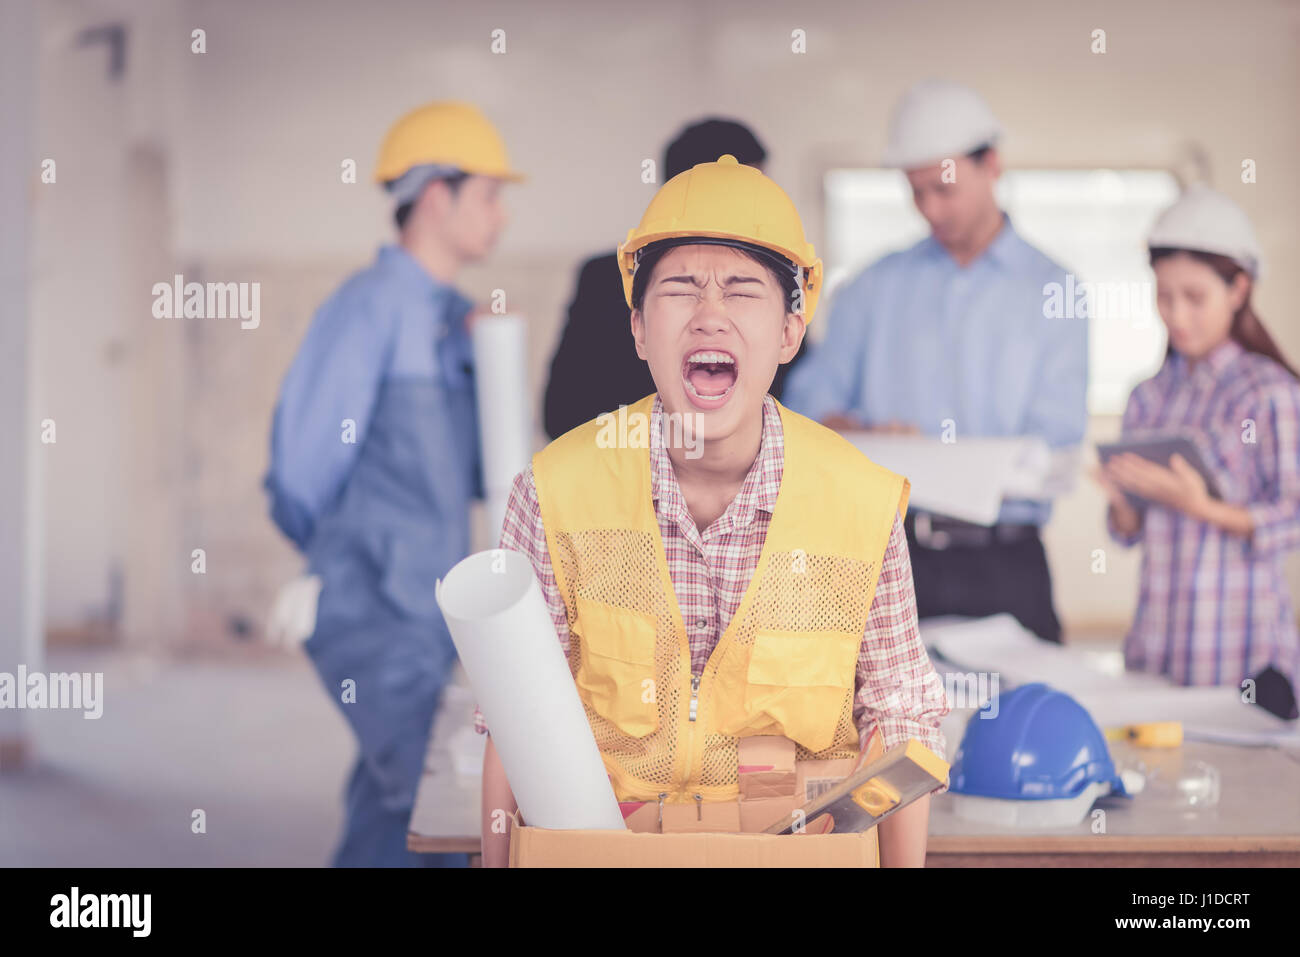 woman fired from job walking and angry over teamwork in construction site building Stock Photo